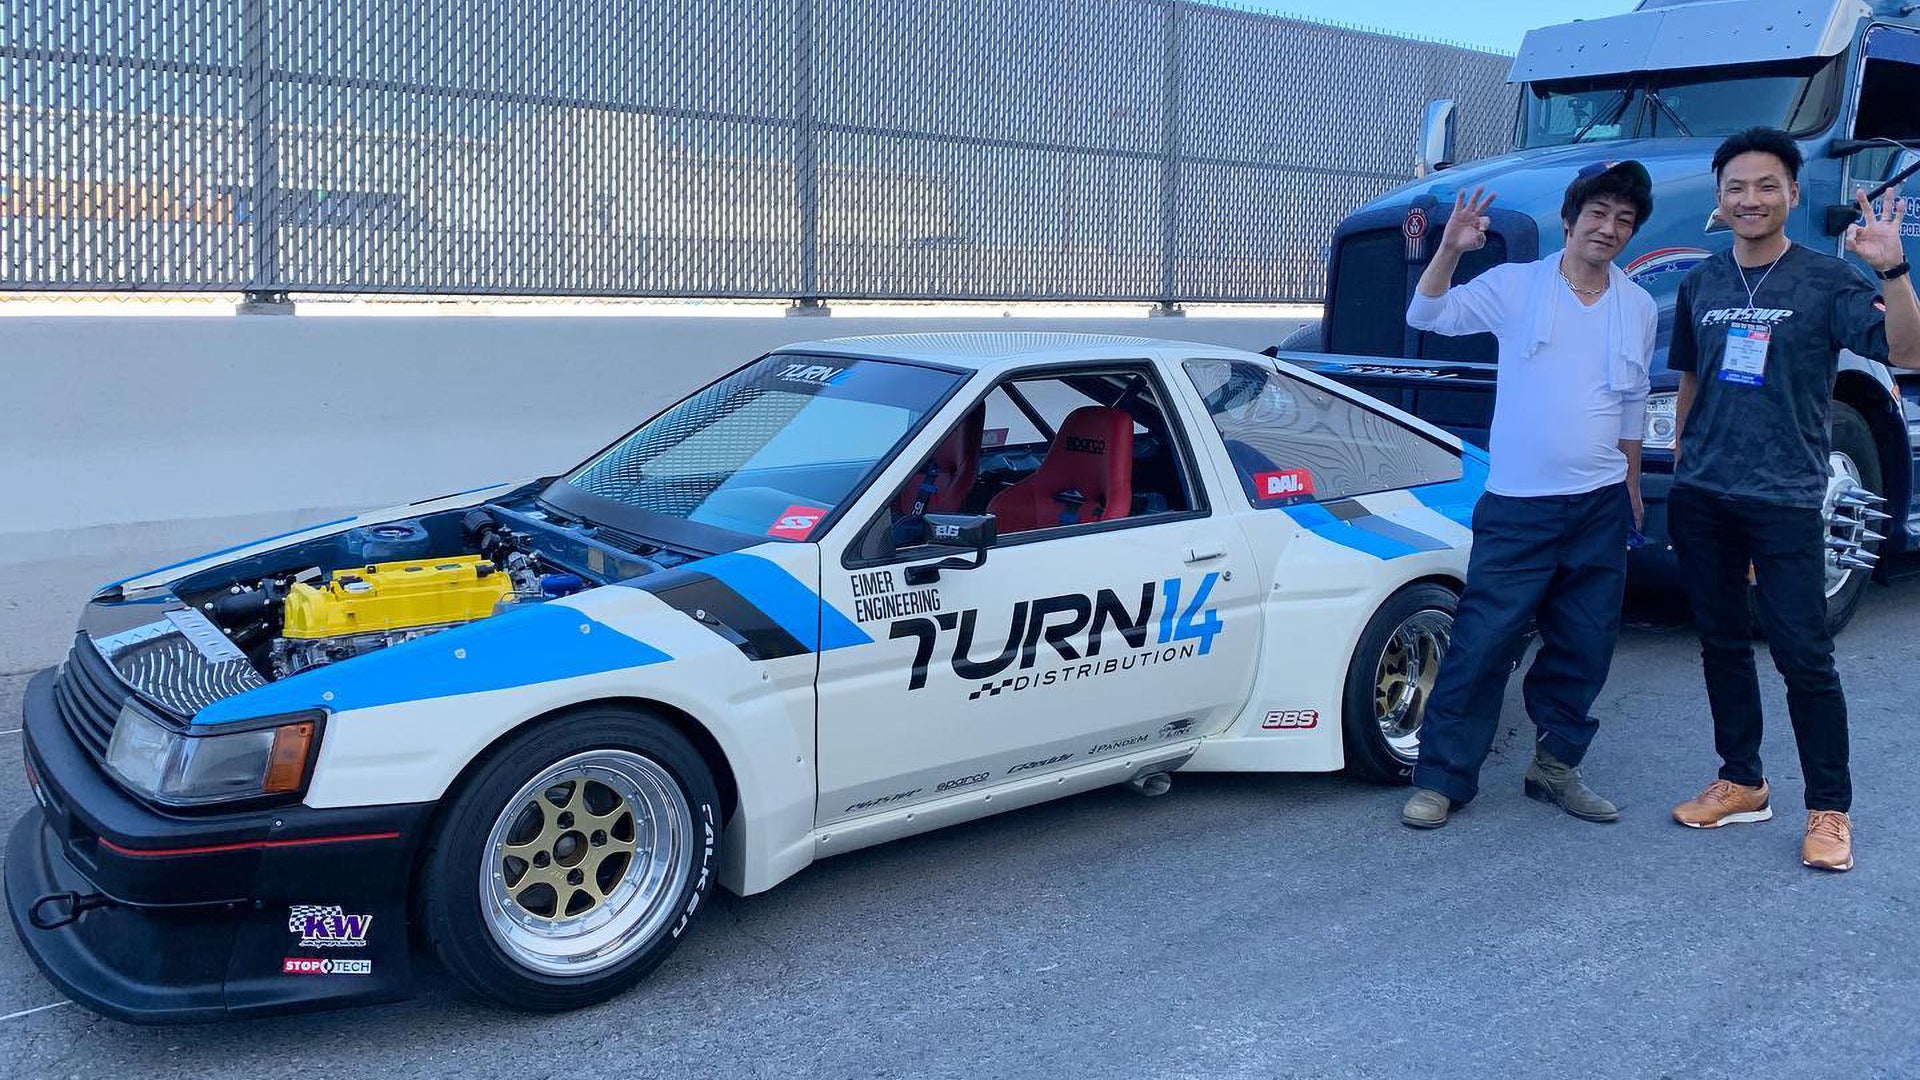 This Toyota Corolla AE86 Drift Car Is Powered by a New Honda Civic Type R E...